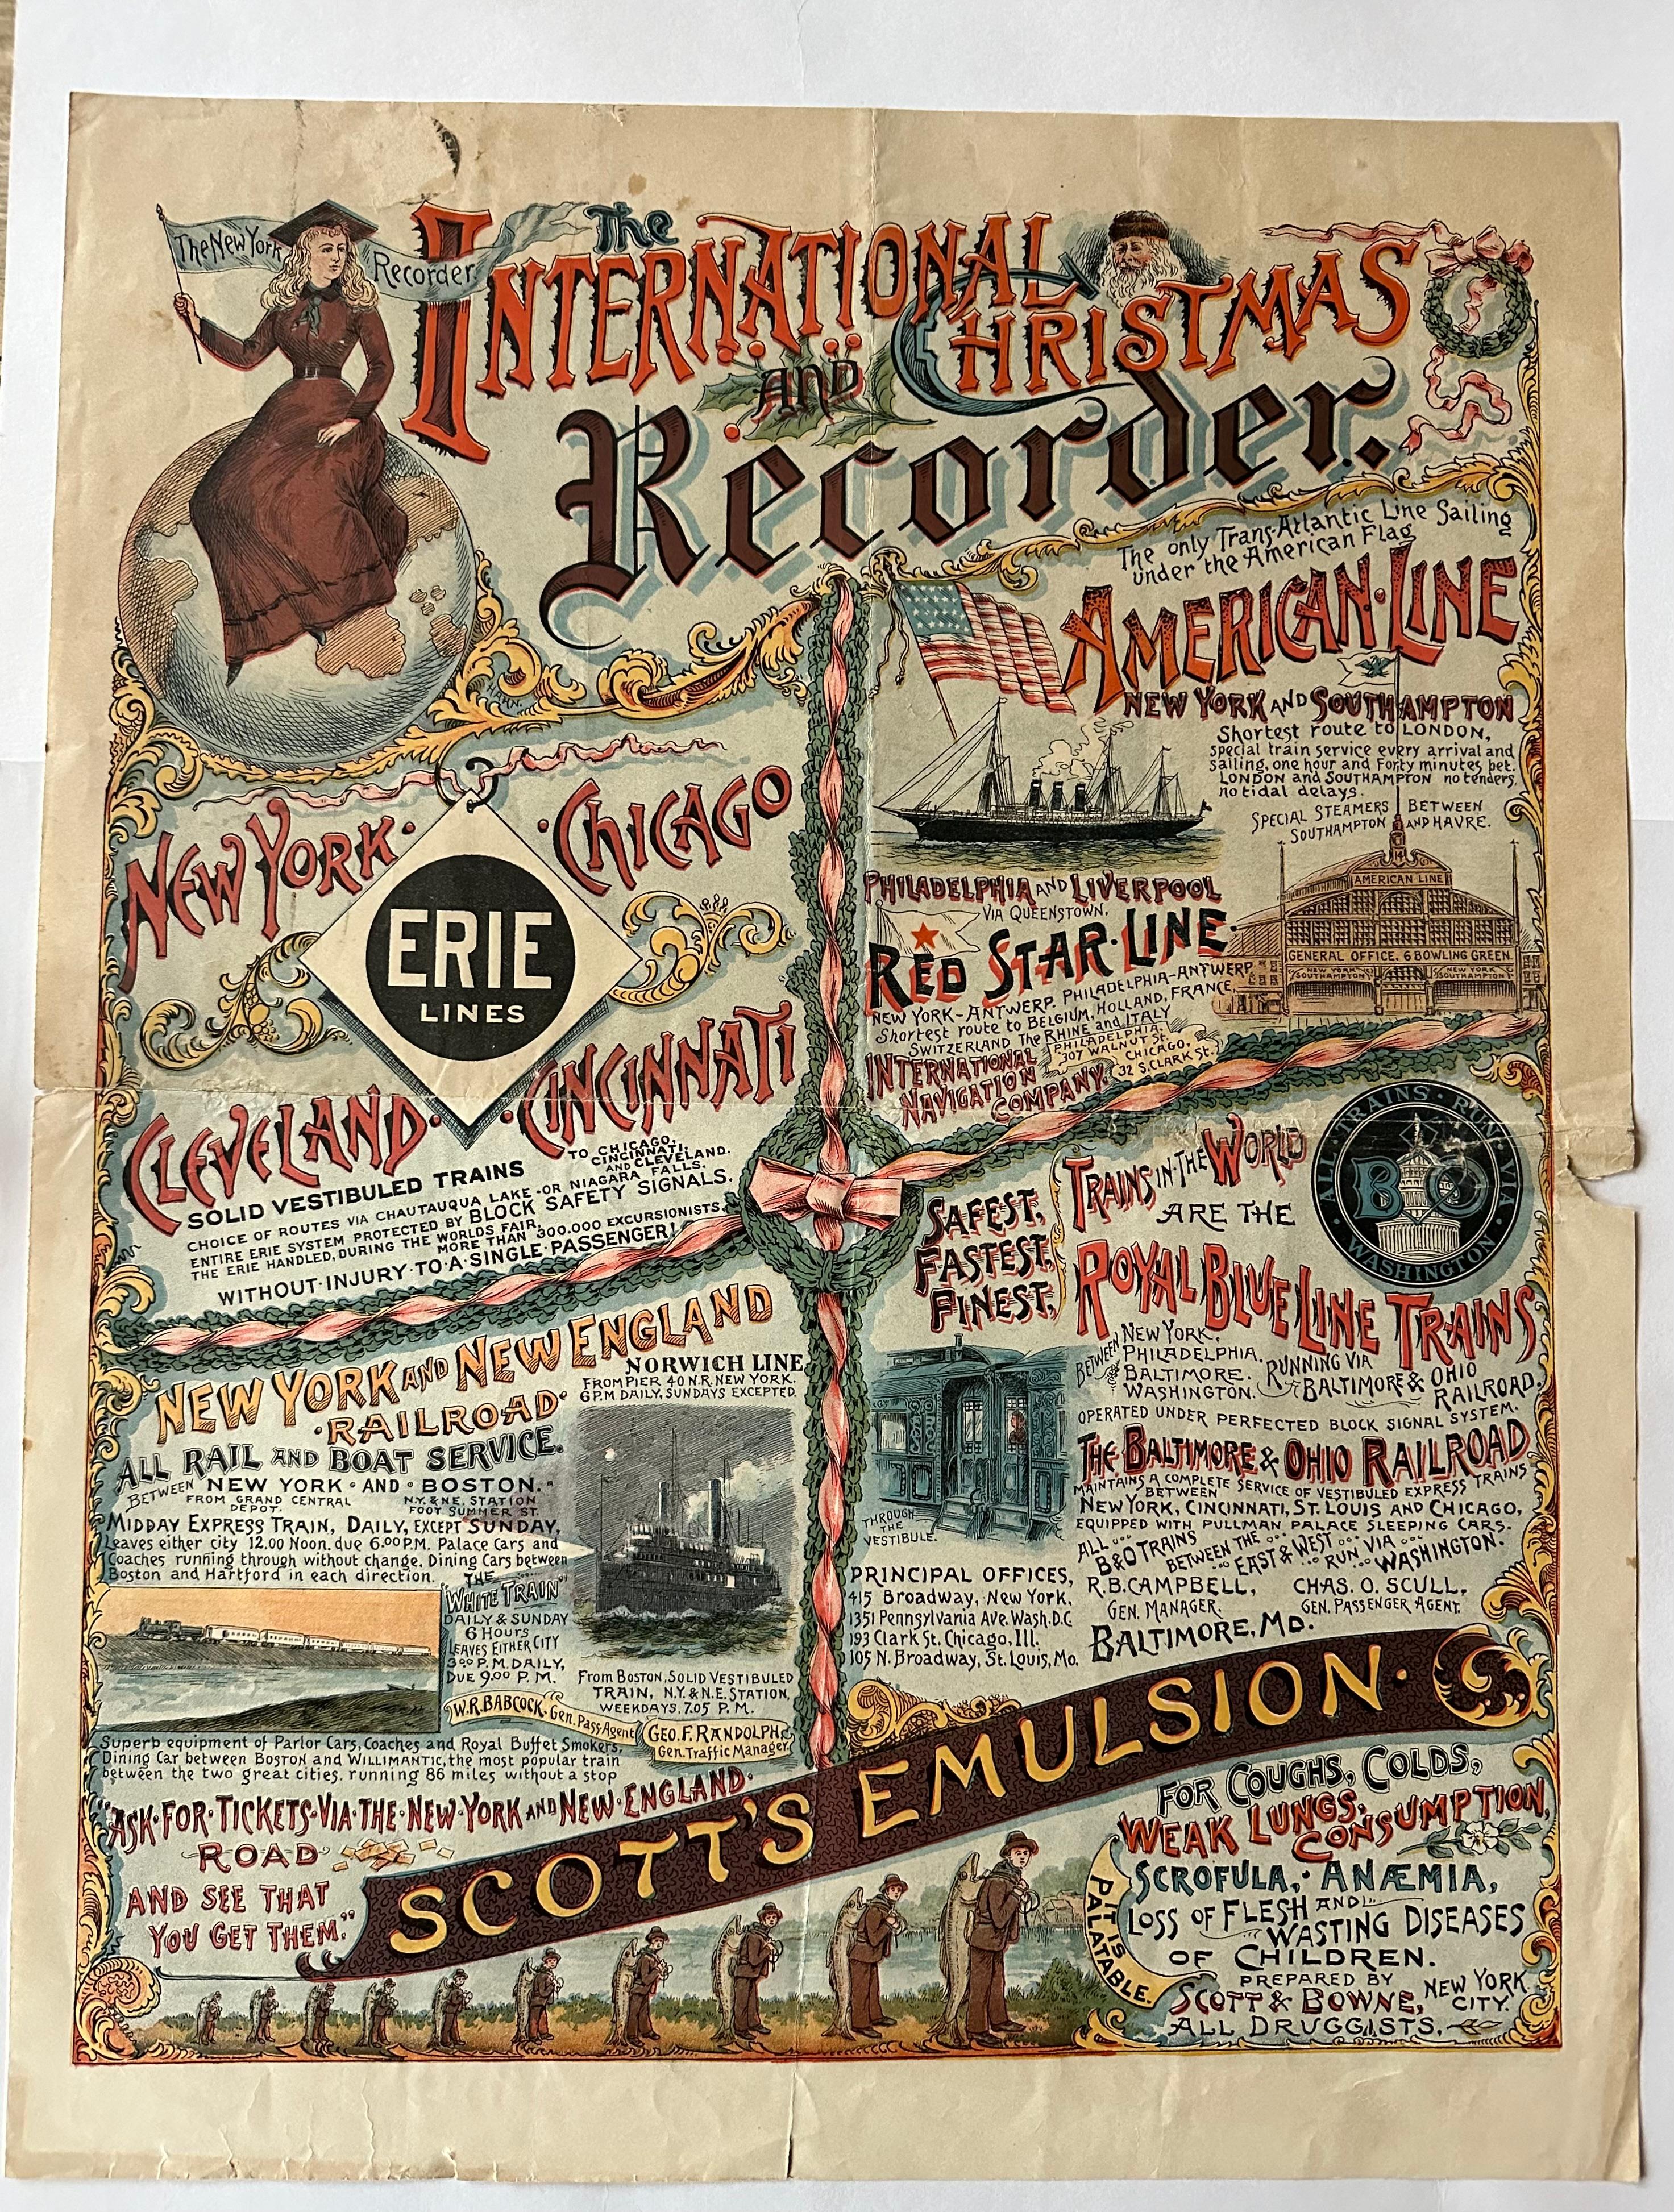 Paper New York Recorder Poster, Christmas Edition, Original Vintage Lithograph, 1893 For Sale